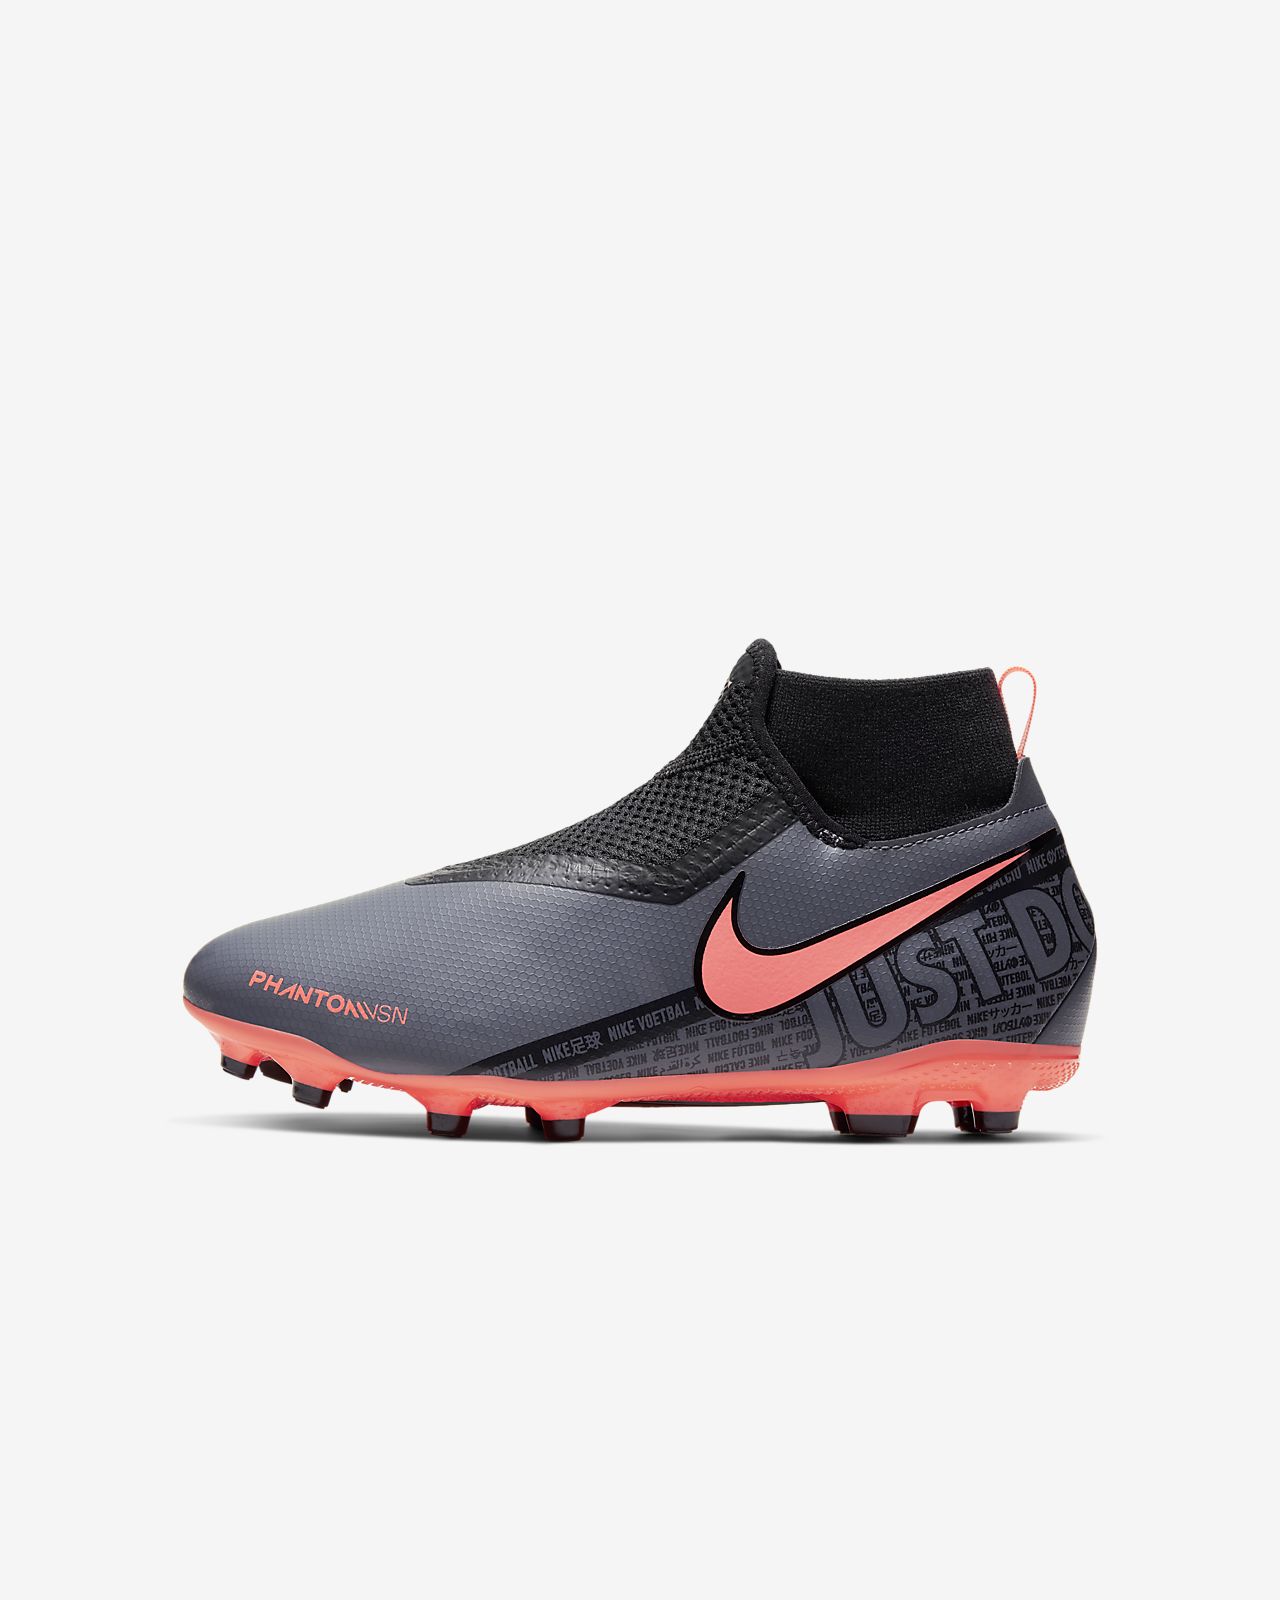 nike laceless soccer cleats off 61 